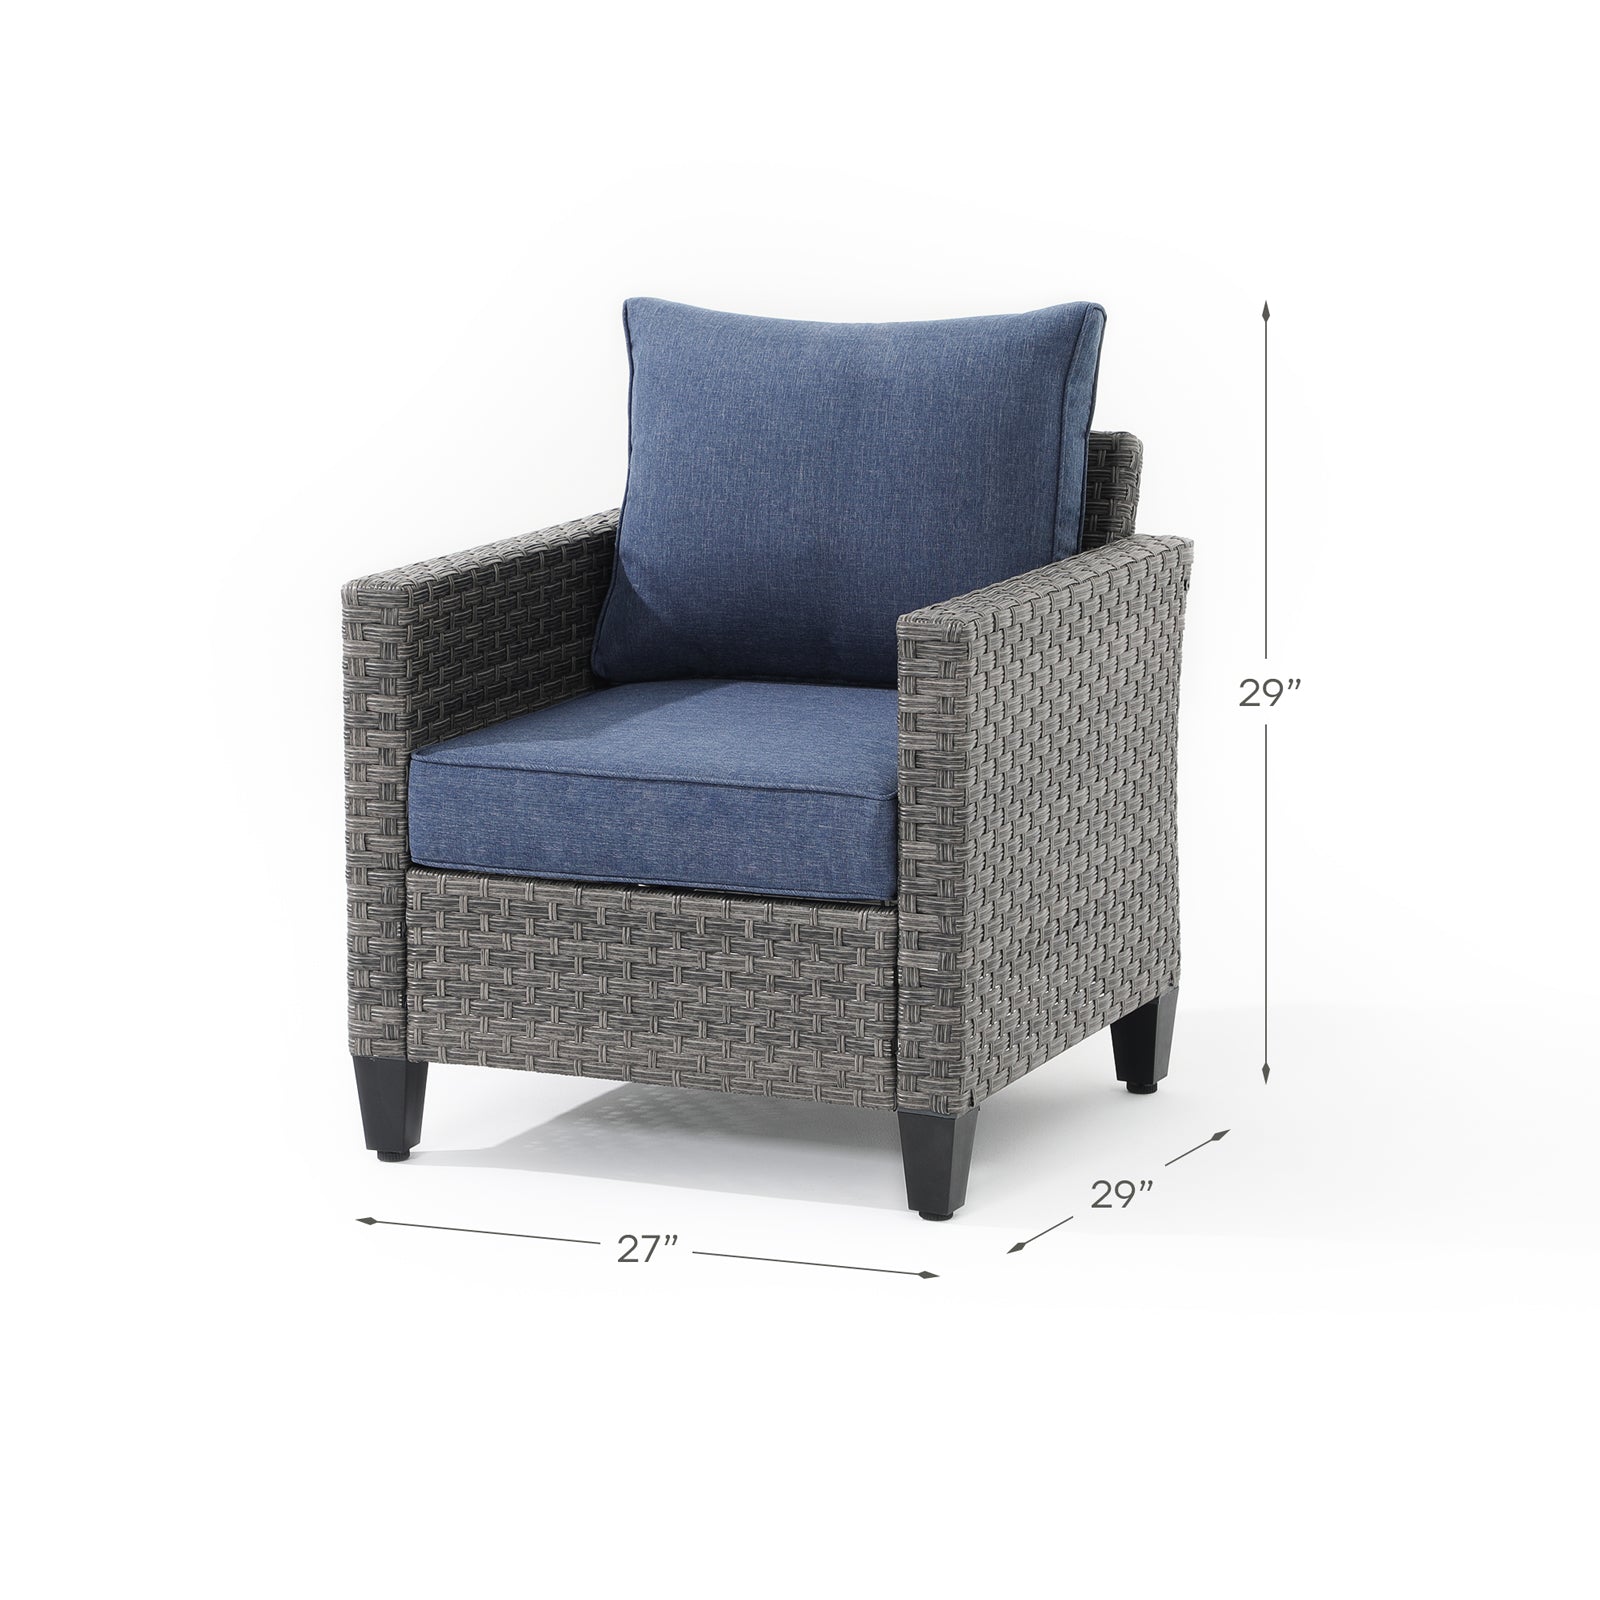 Ayia lounge chair with rattan design, navy blue cushions, dimension information  - Jardina Furniture #color_Navy blue